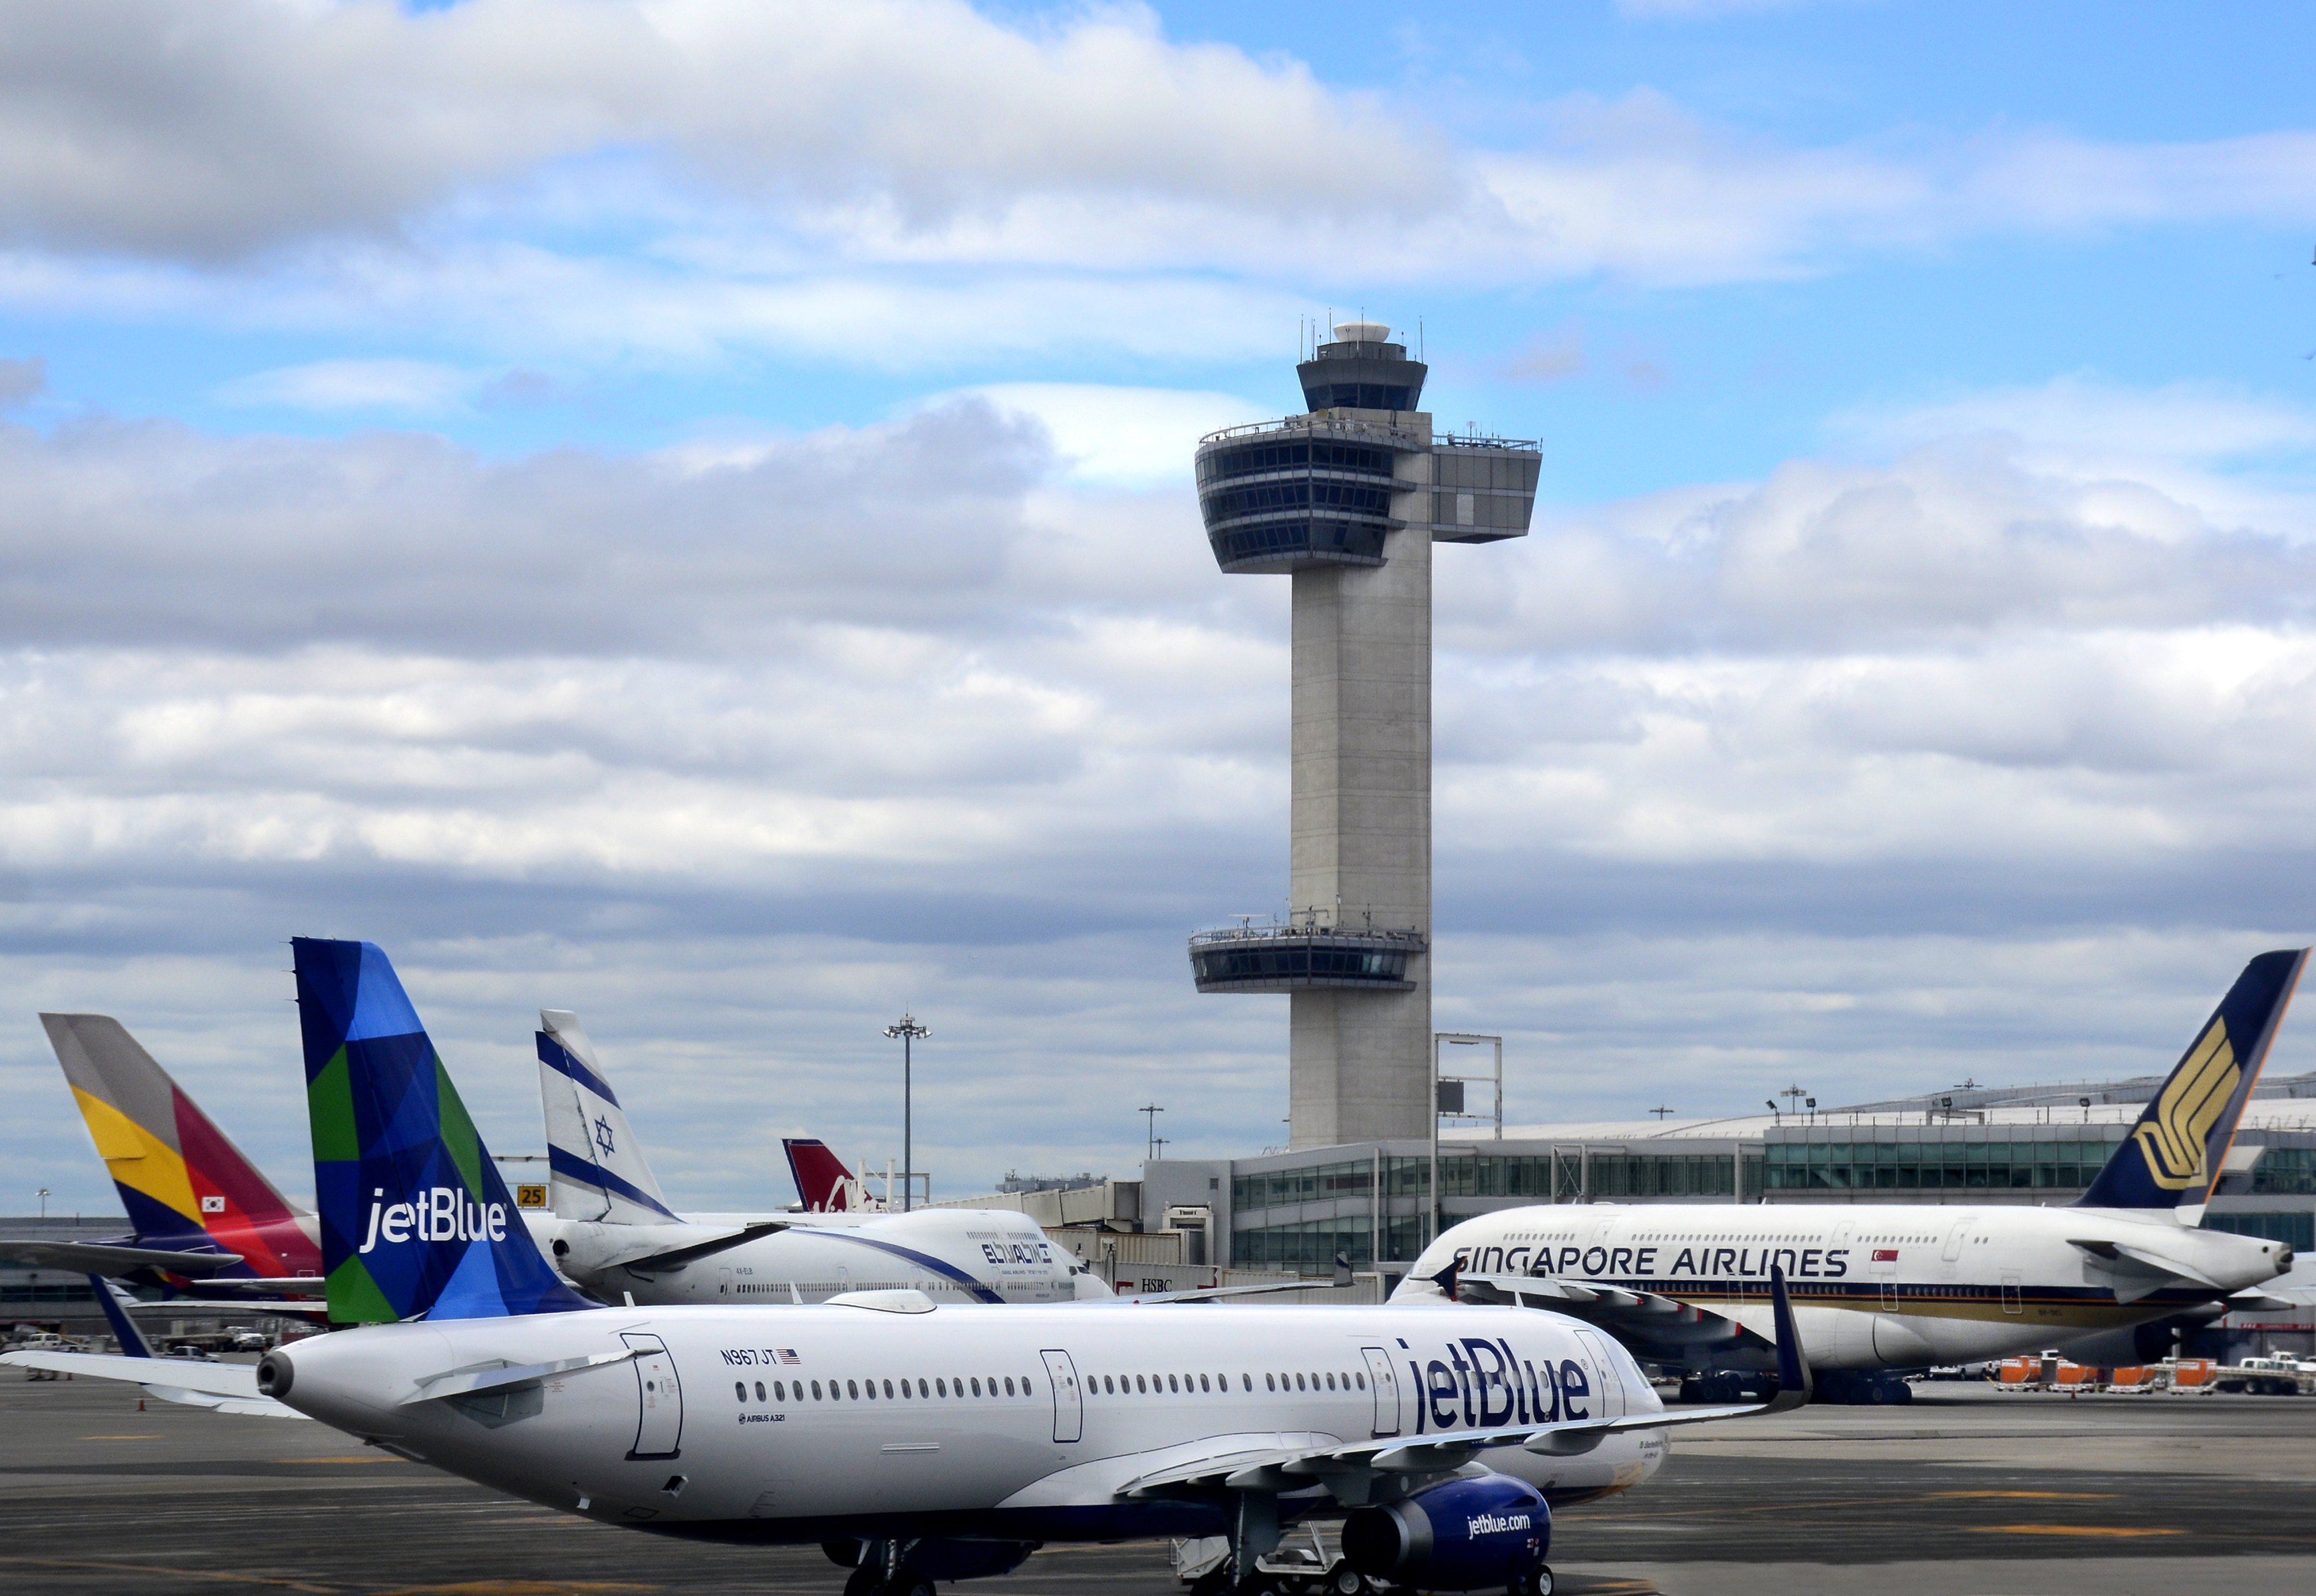 JetBlue and Singapore Airlines on tarmac at JFK